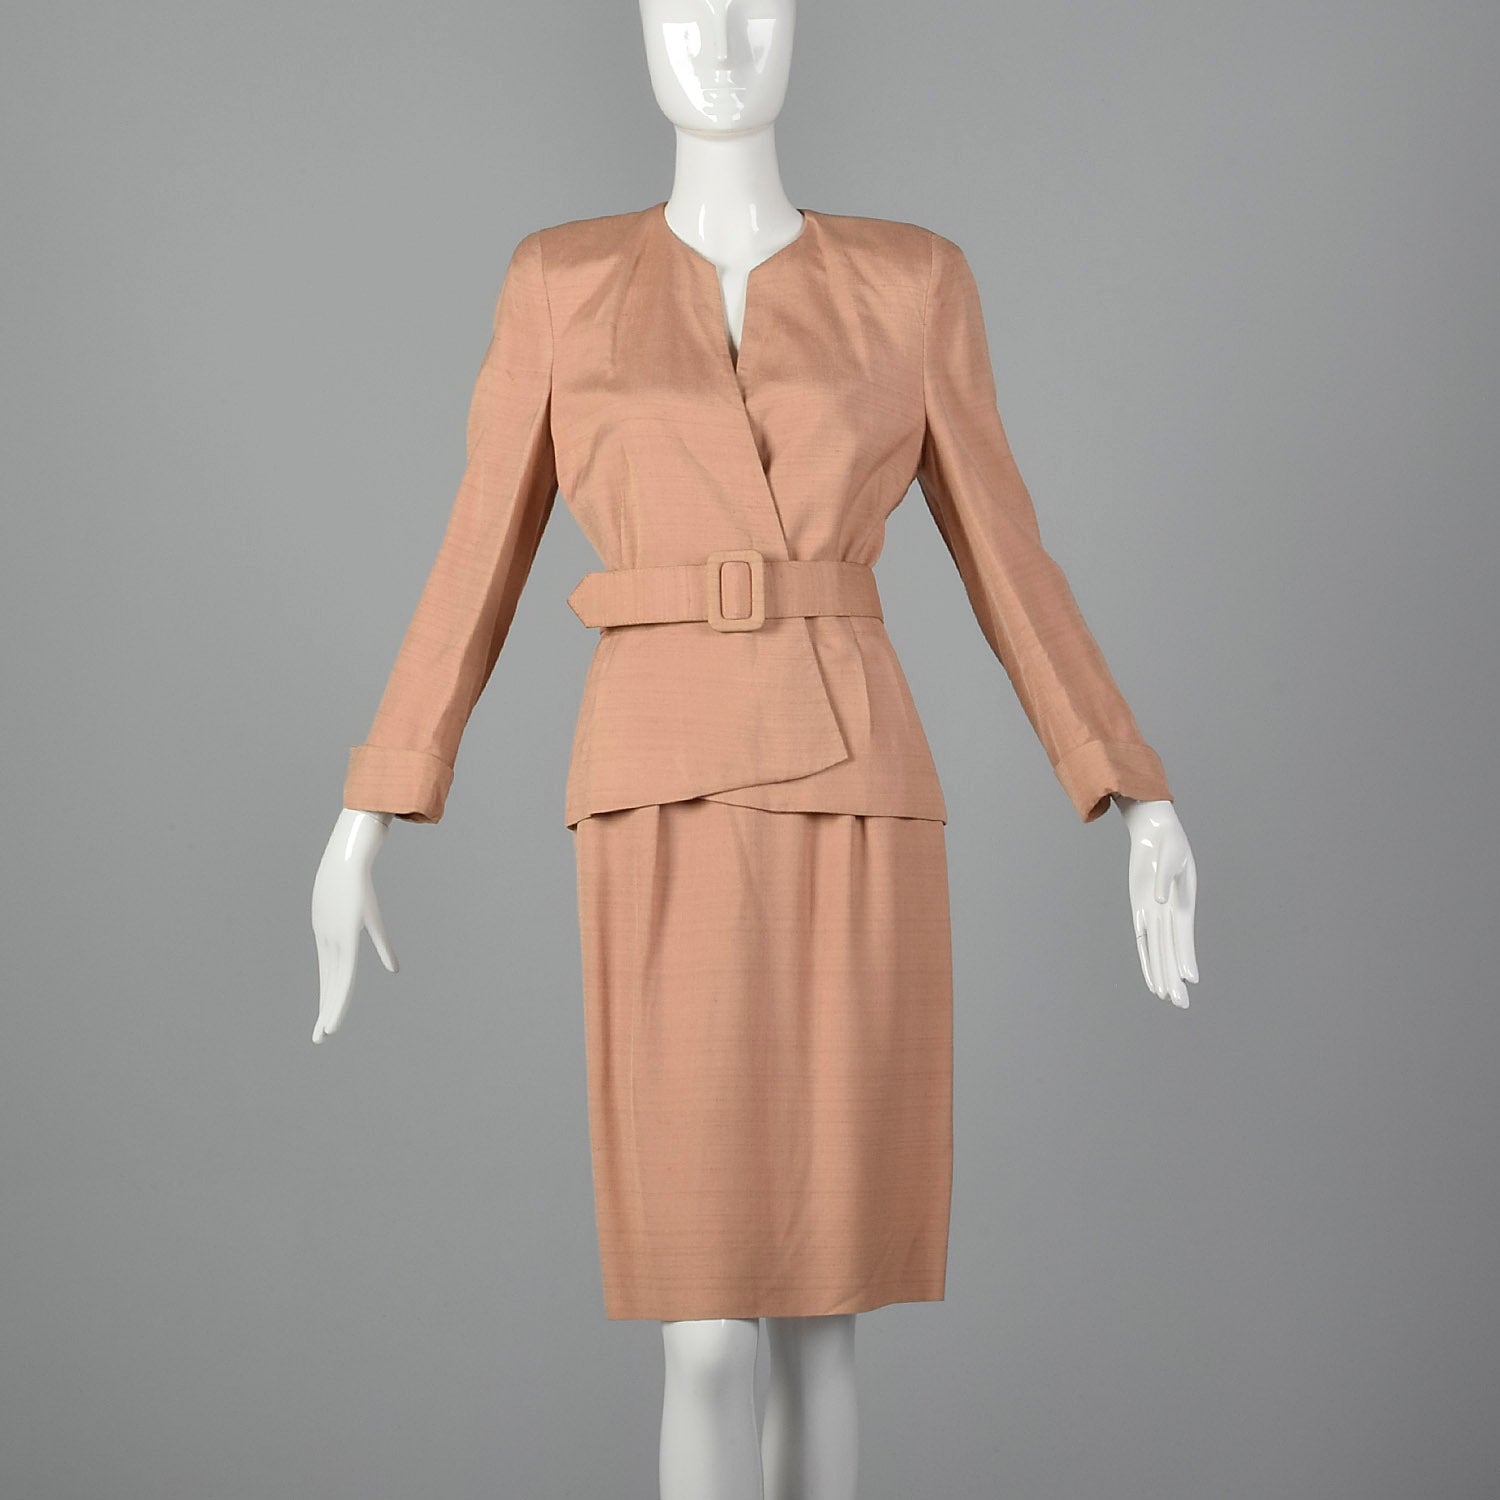 Small Christian Dior 1980s Skirt Suit